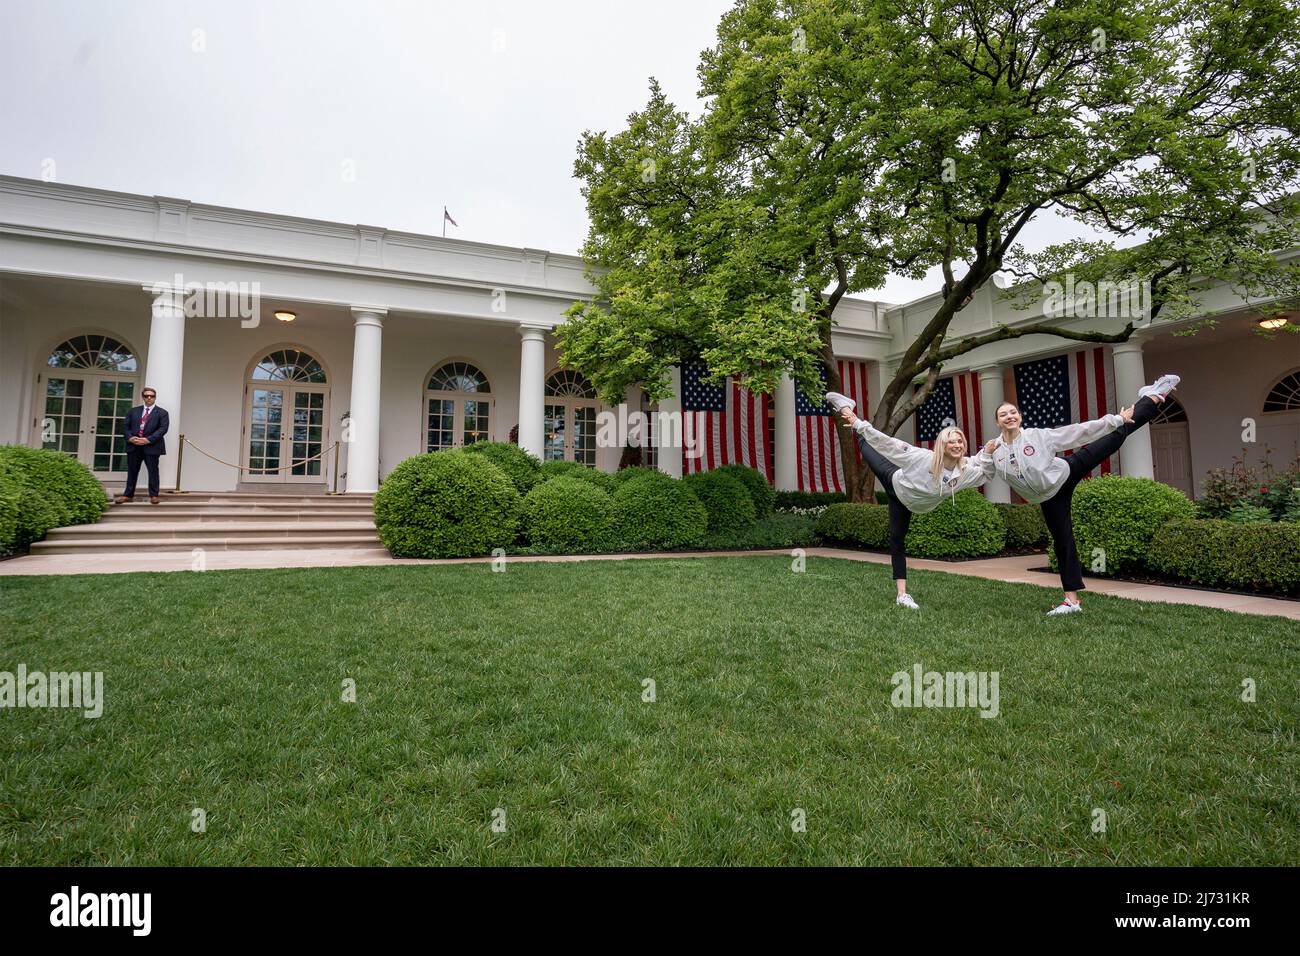 Washington, United States of America. 04 May, 2022. U.S Olympic gymnasts MyKayla Skinner, left, and Grace McCallum, right, pose together in the Rose Garden during an event welcoming the athletes that participated in the Tokyo 2020 Summer Olympic and Paralympics, Beijing 2022 Winter Olympic and Paralympics, May 4, 2022 in Washington, D.C.  Credit: White House Photo/White House Photo/Alamy Live News Stock Photo